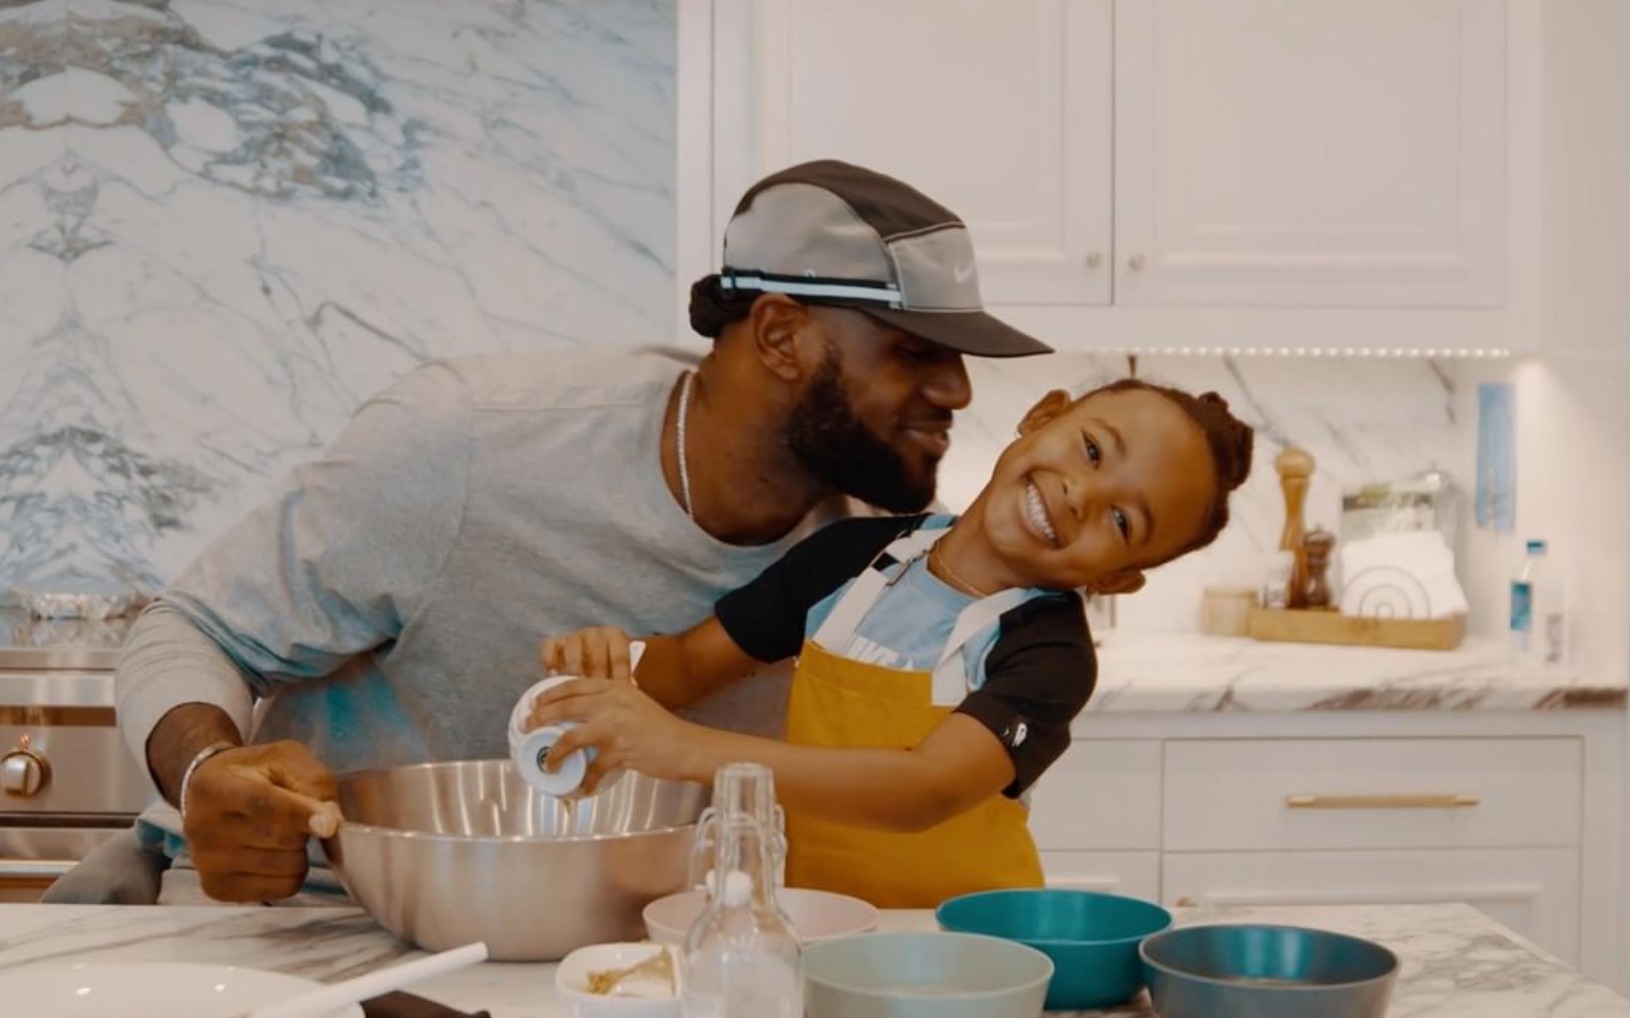 Explore The Daily Life Of Lebron James With His Daughter Zhuri - Car Magazine TV